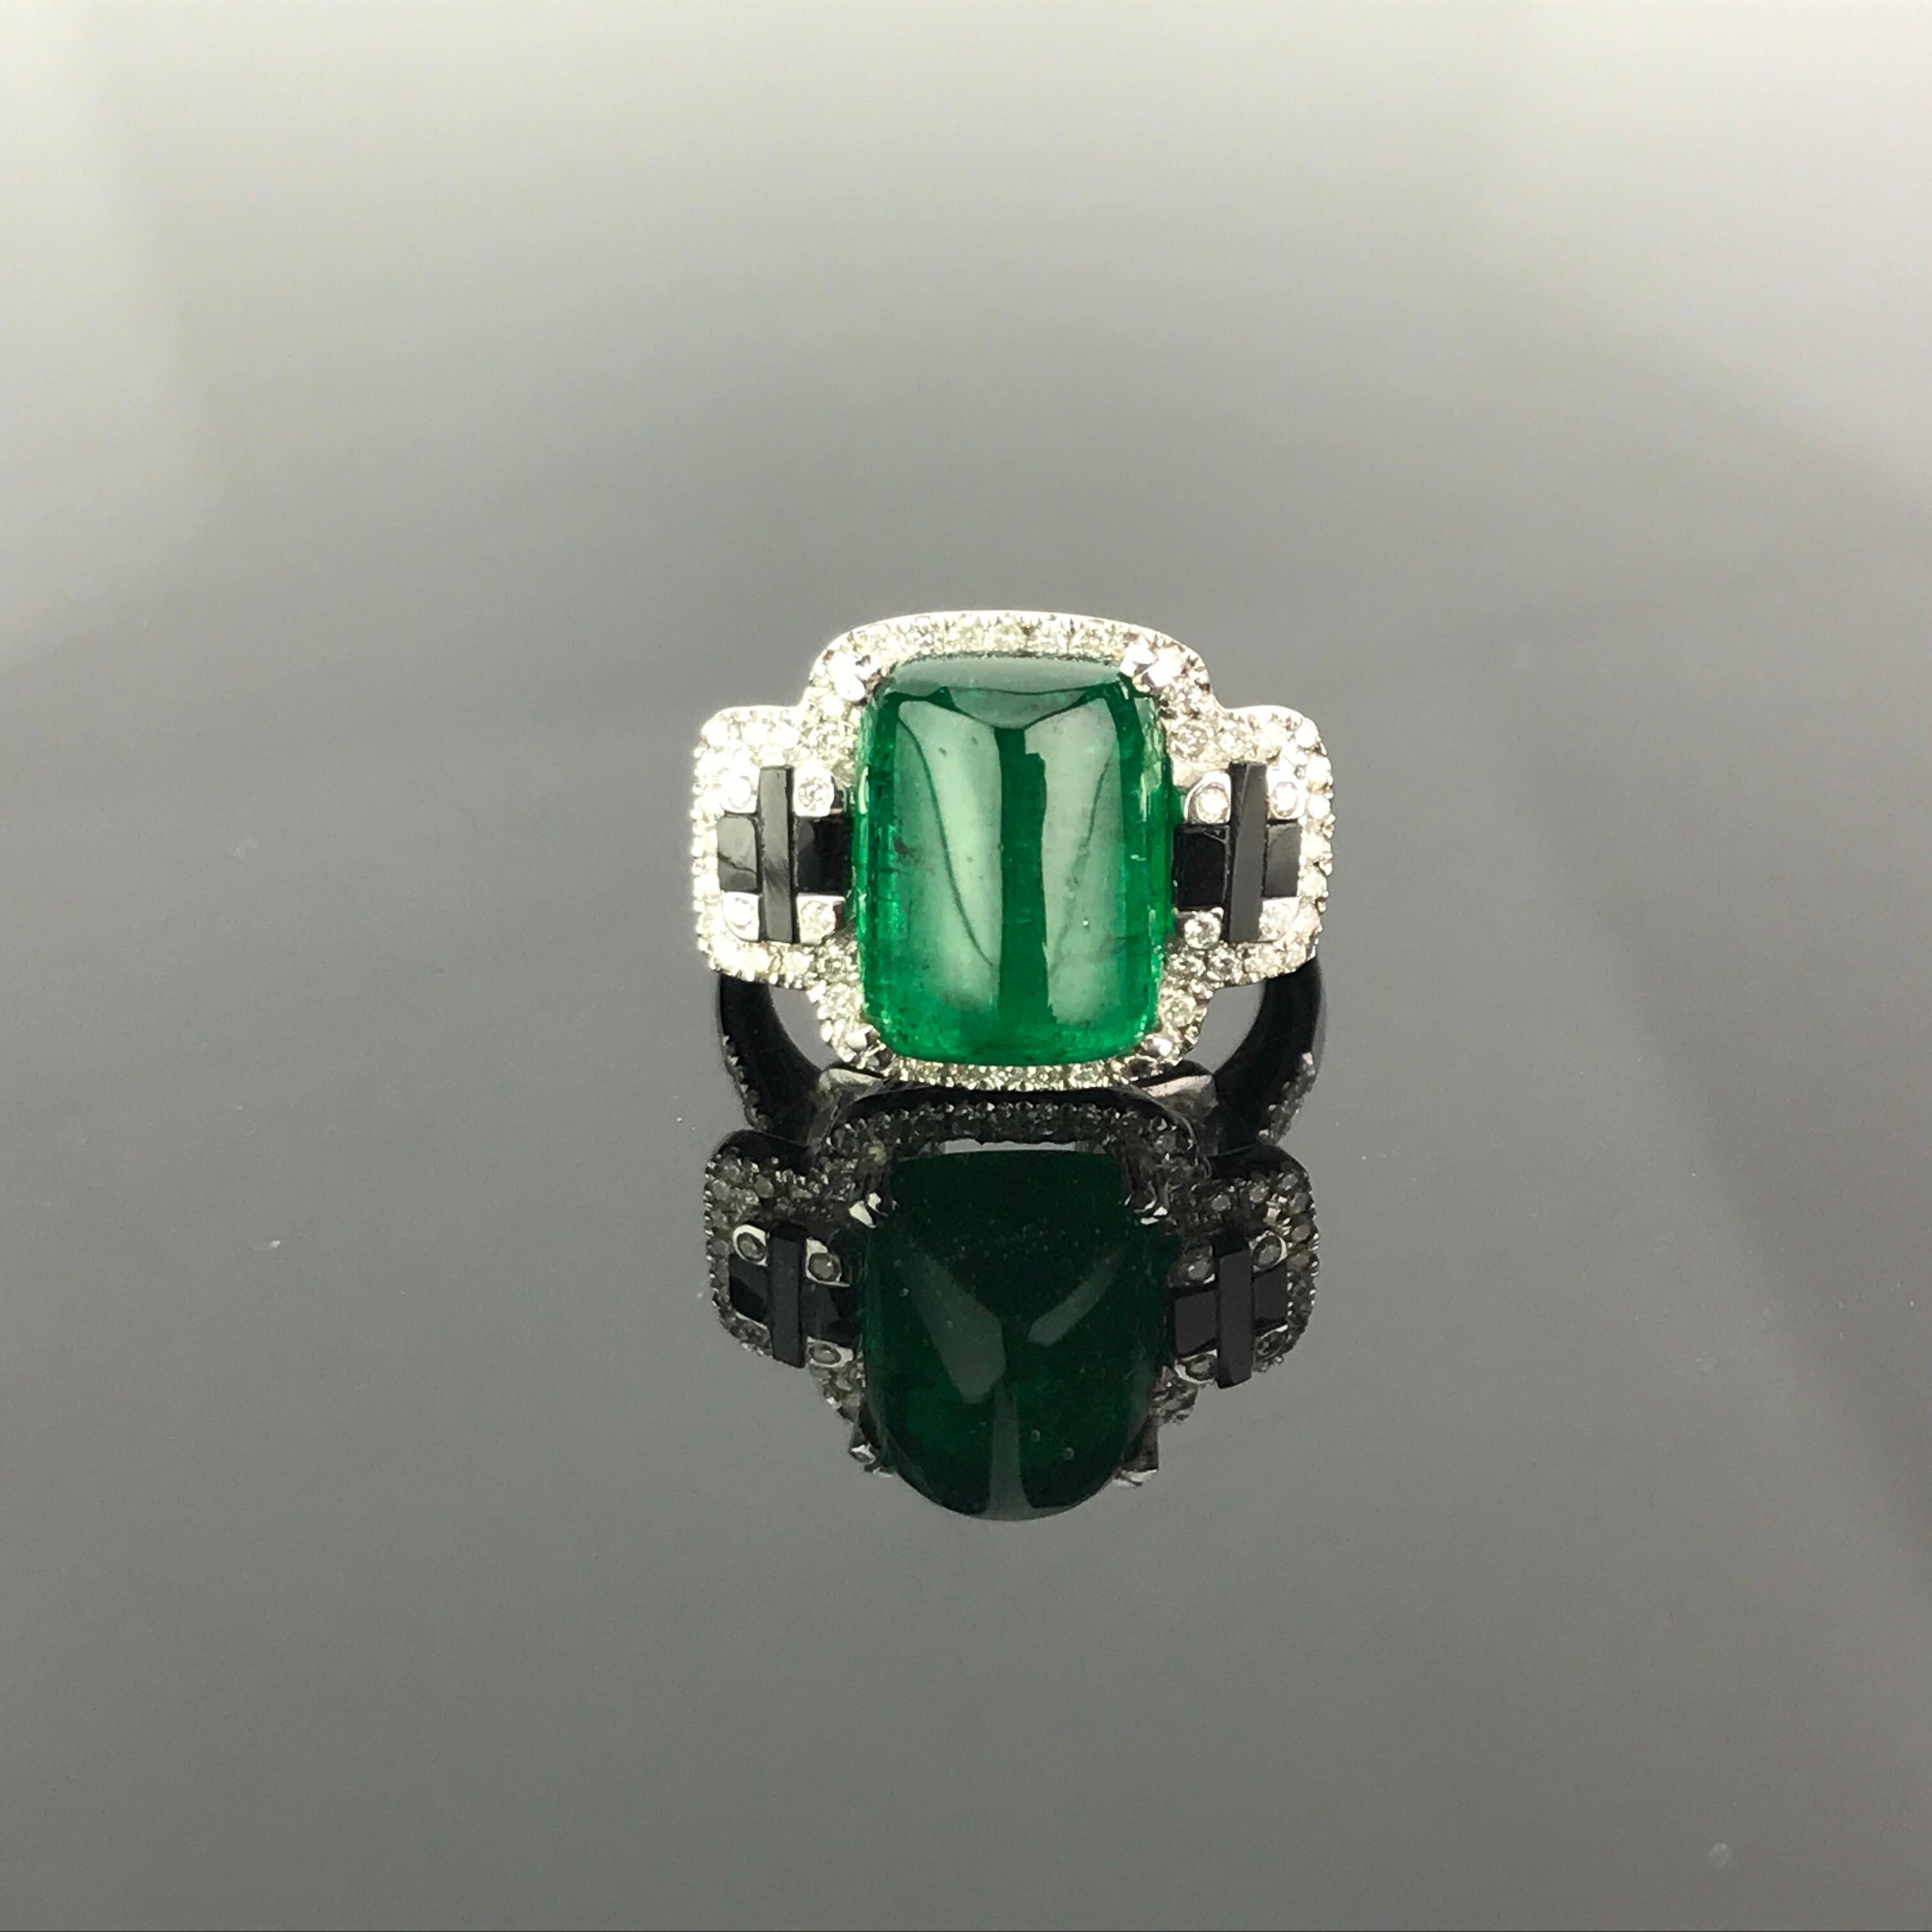 One of a kind cocktail ring using, transparent  5.62 carat Zambian Emerald with great lustre and beautiful colour adorned with Black Onyx and Diamonds. Currently a ring size US 6, but we can resize the ring for you without additional cost.